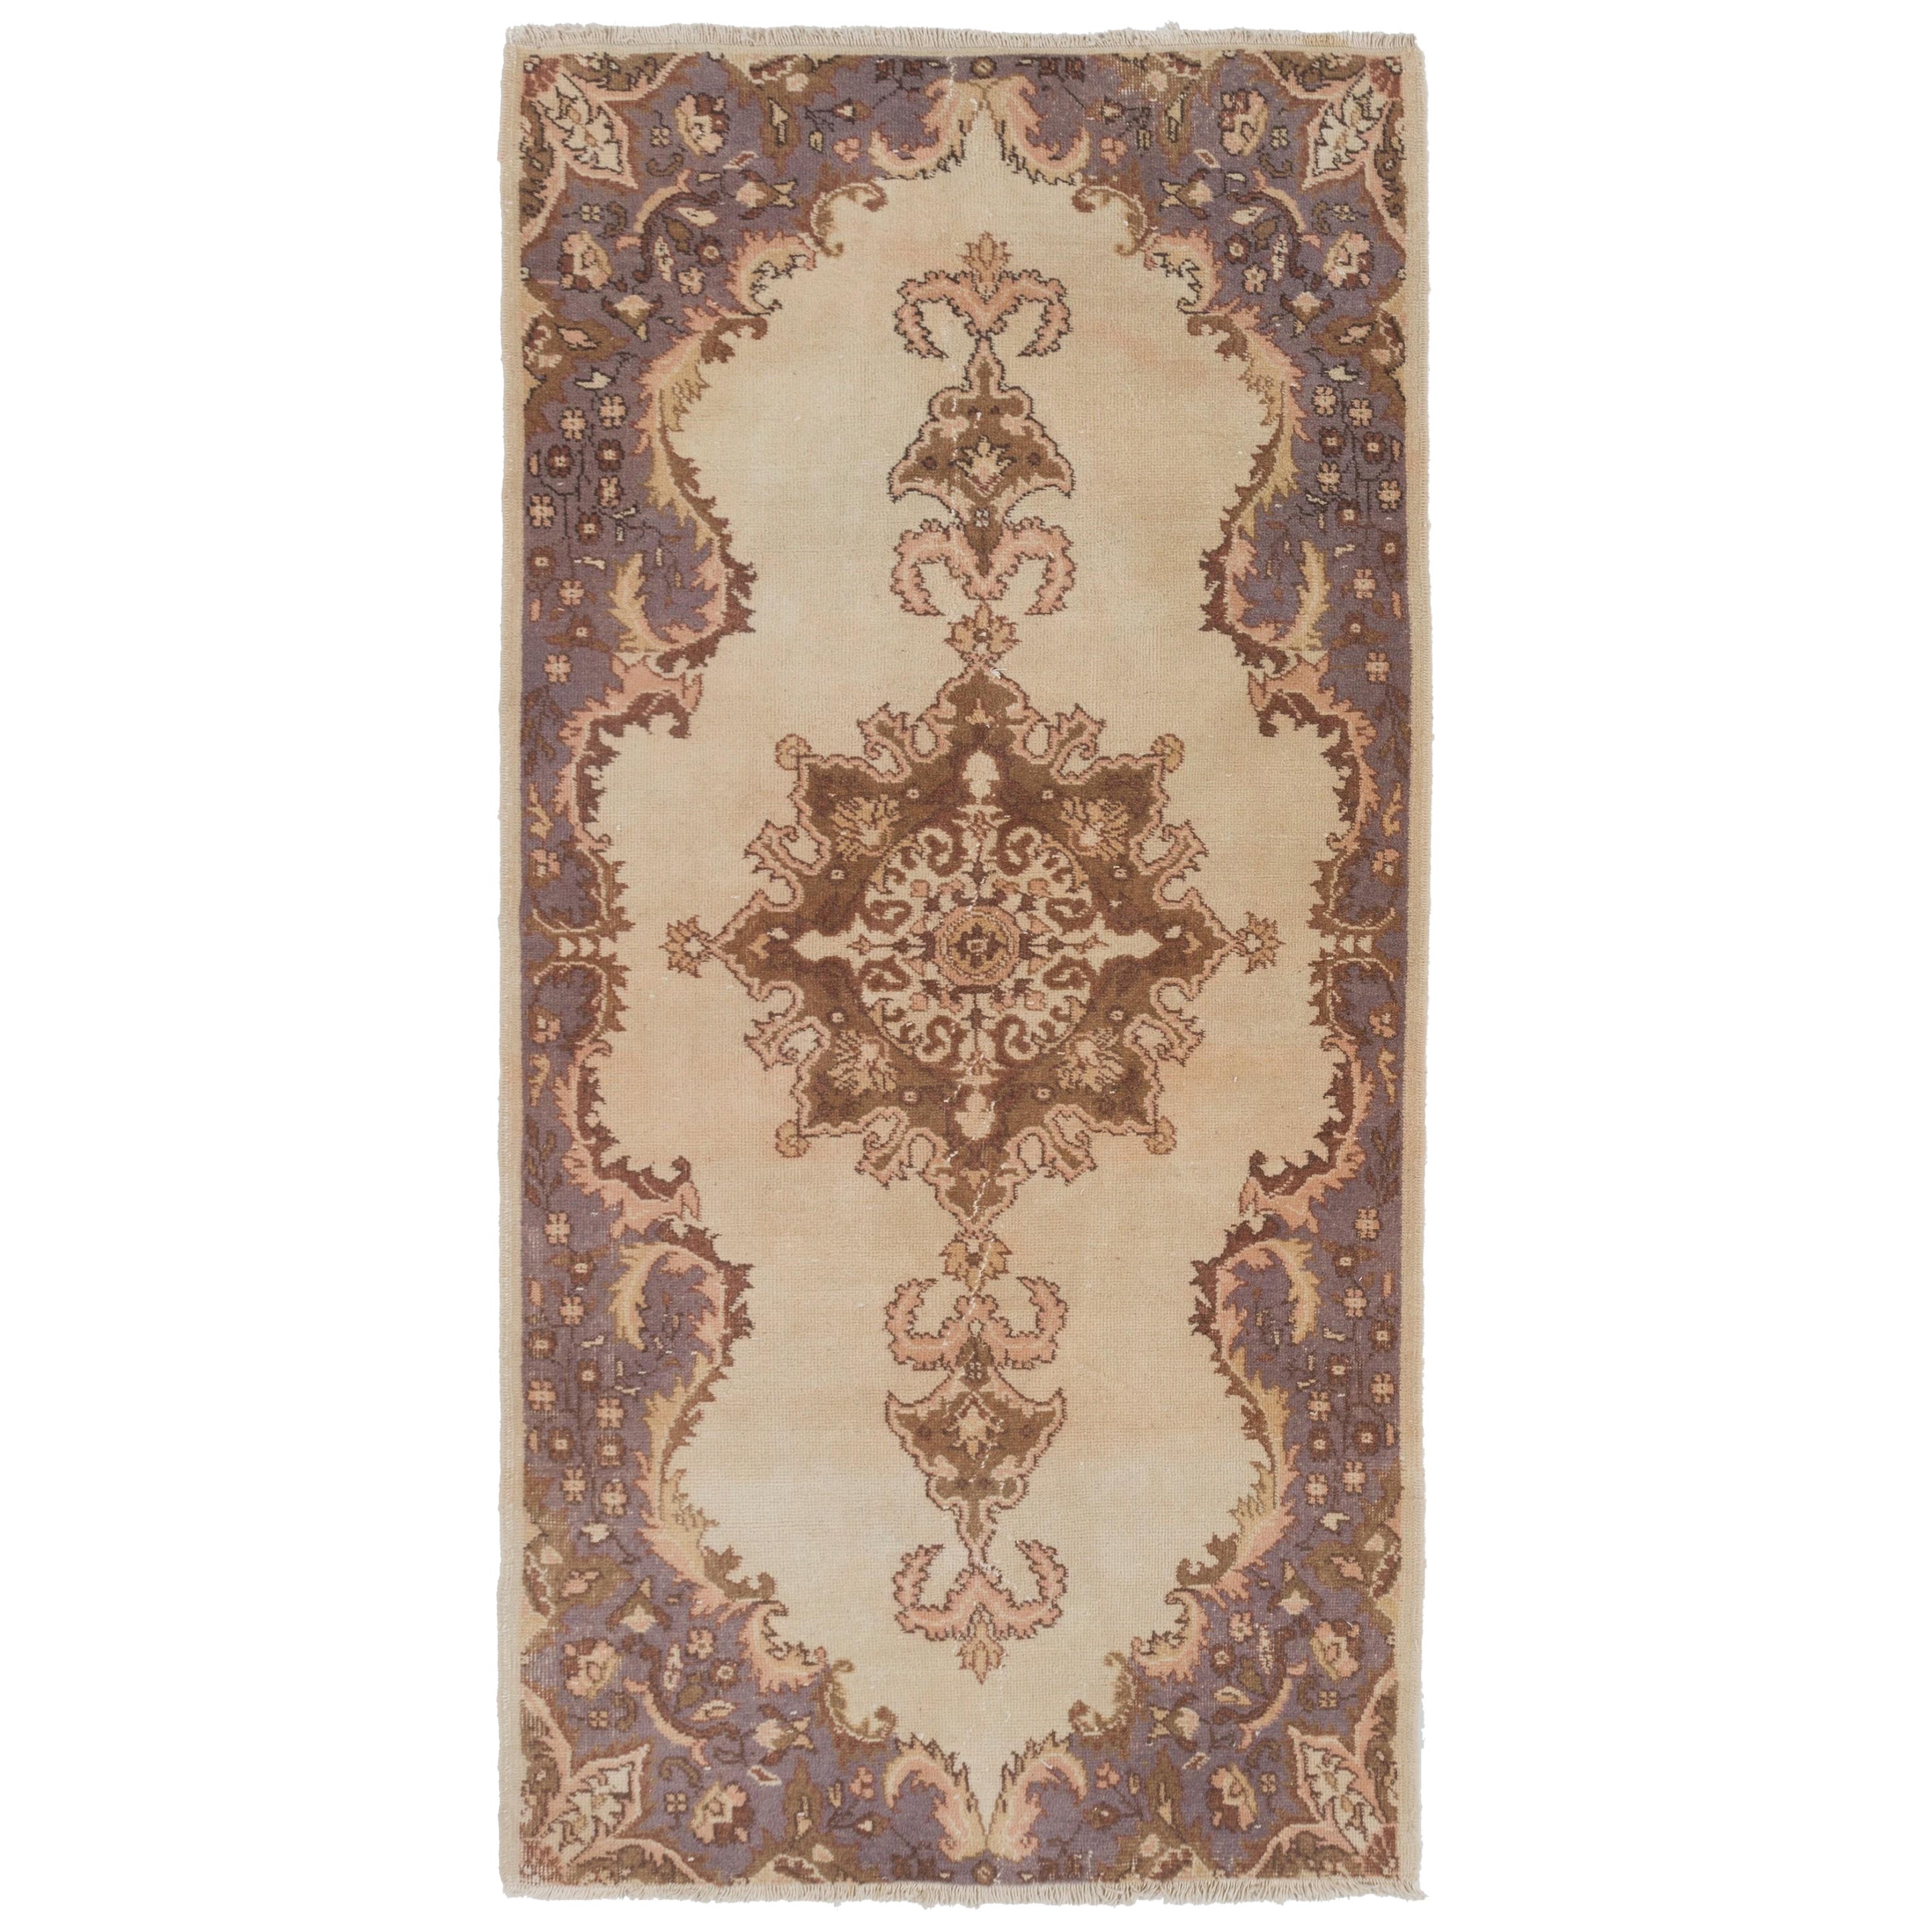 3.8x7.6 ft Hand-Knotted Vintage Anatolian Oushak Rug, Wool and Cotton Carpet